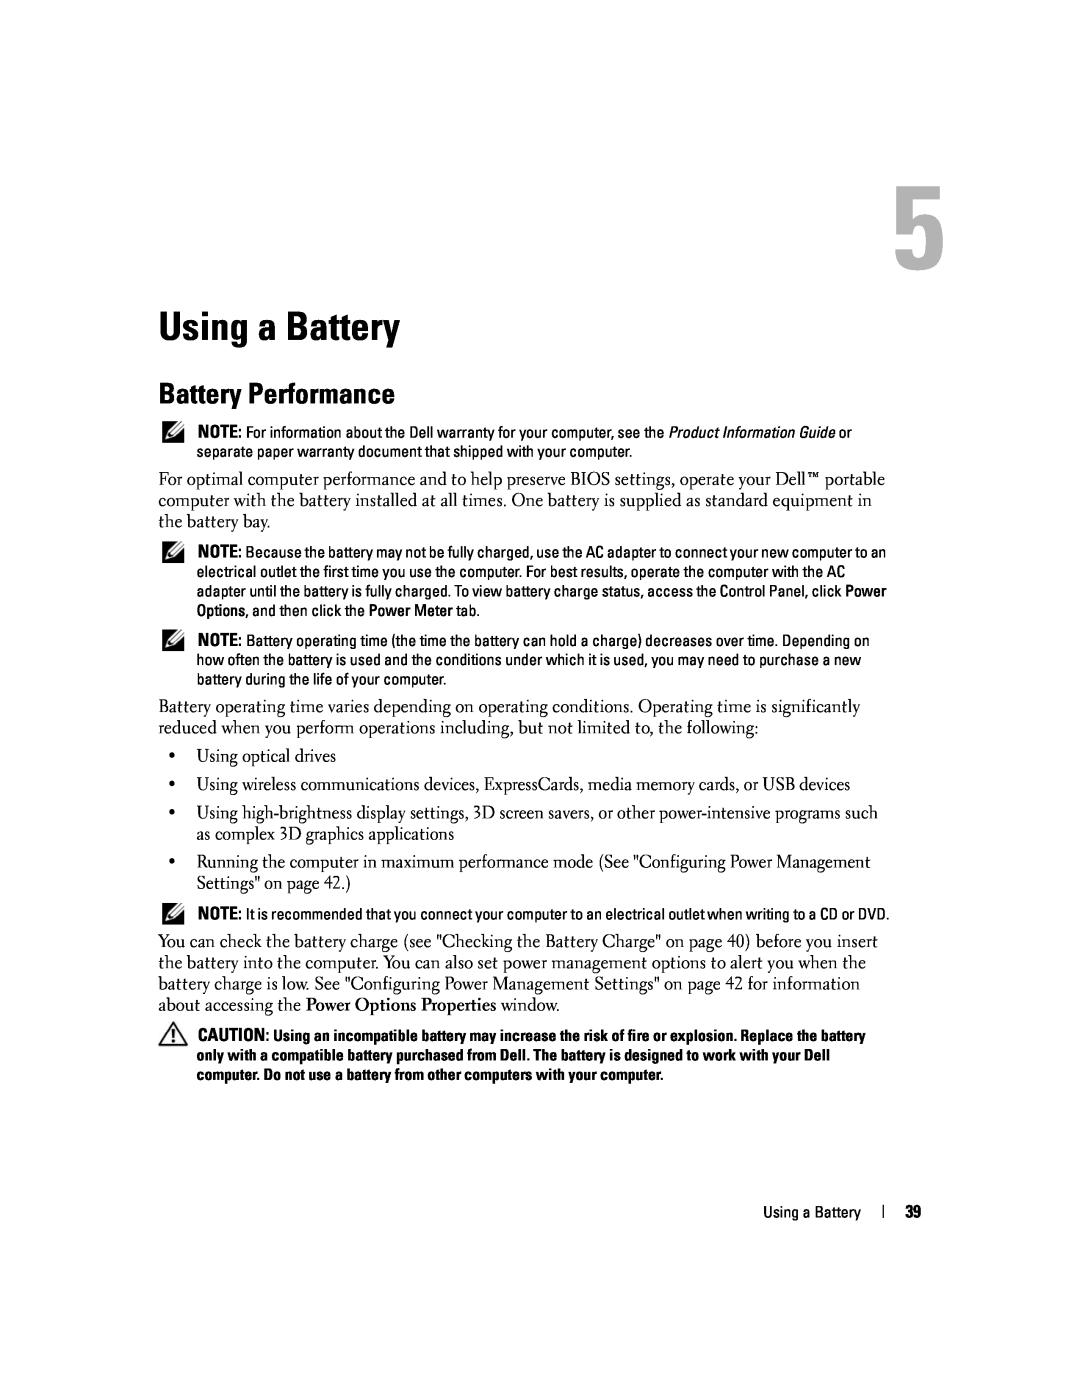 Dell 1501 owner manual Using a Battery, Battery Performance 